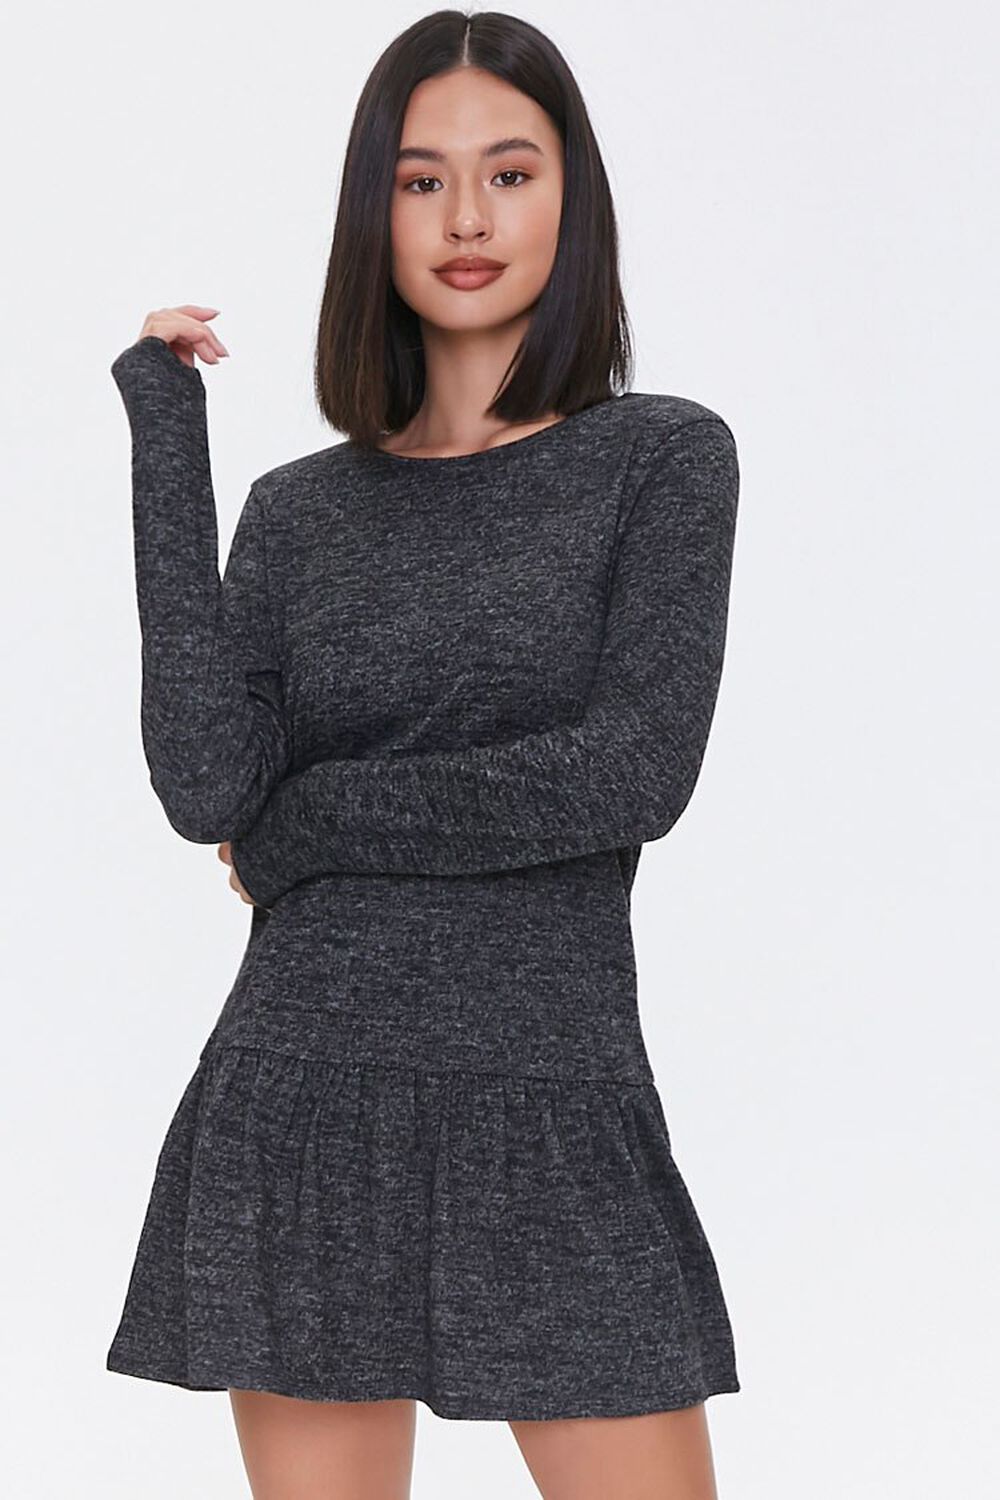 CHARCOAL French Terry Drop Waist Dress, image 1